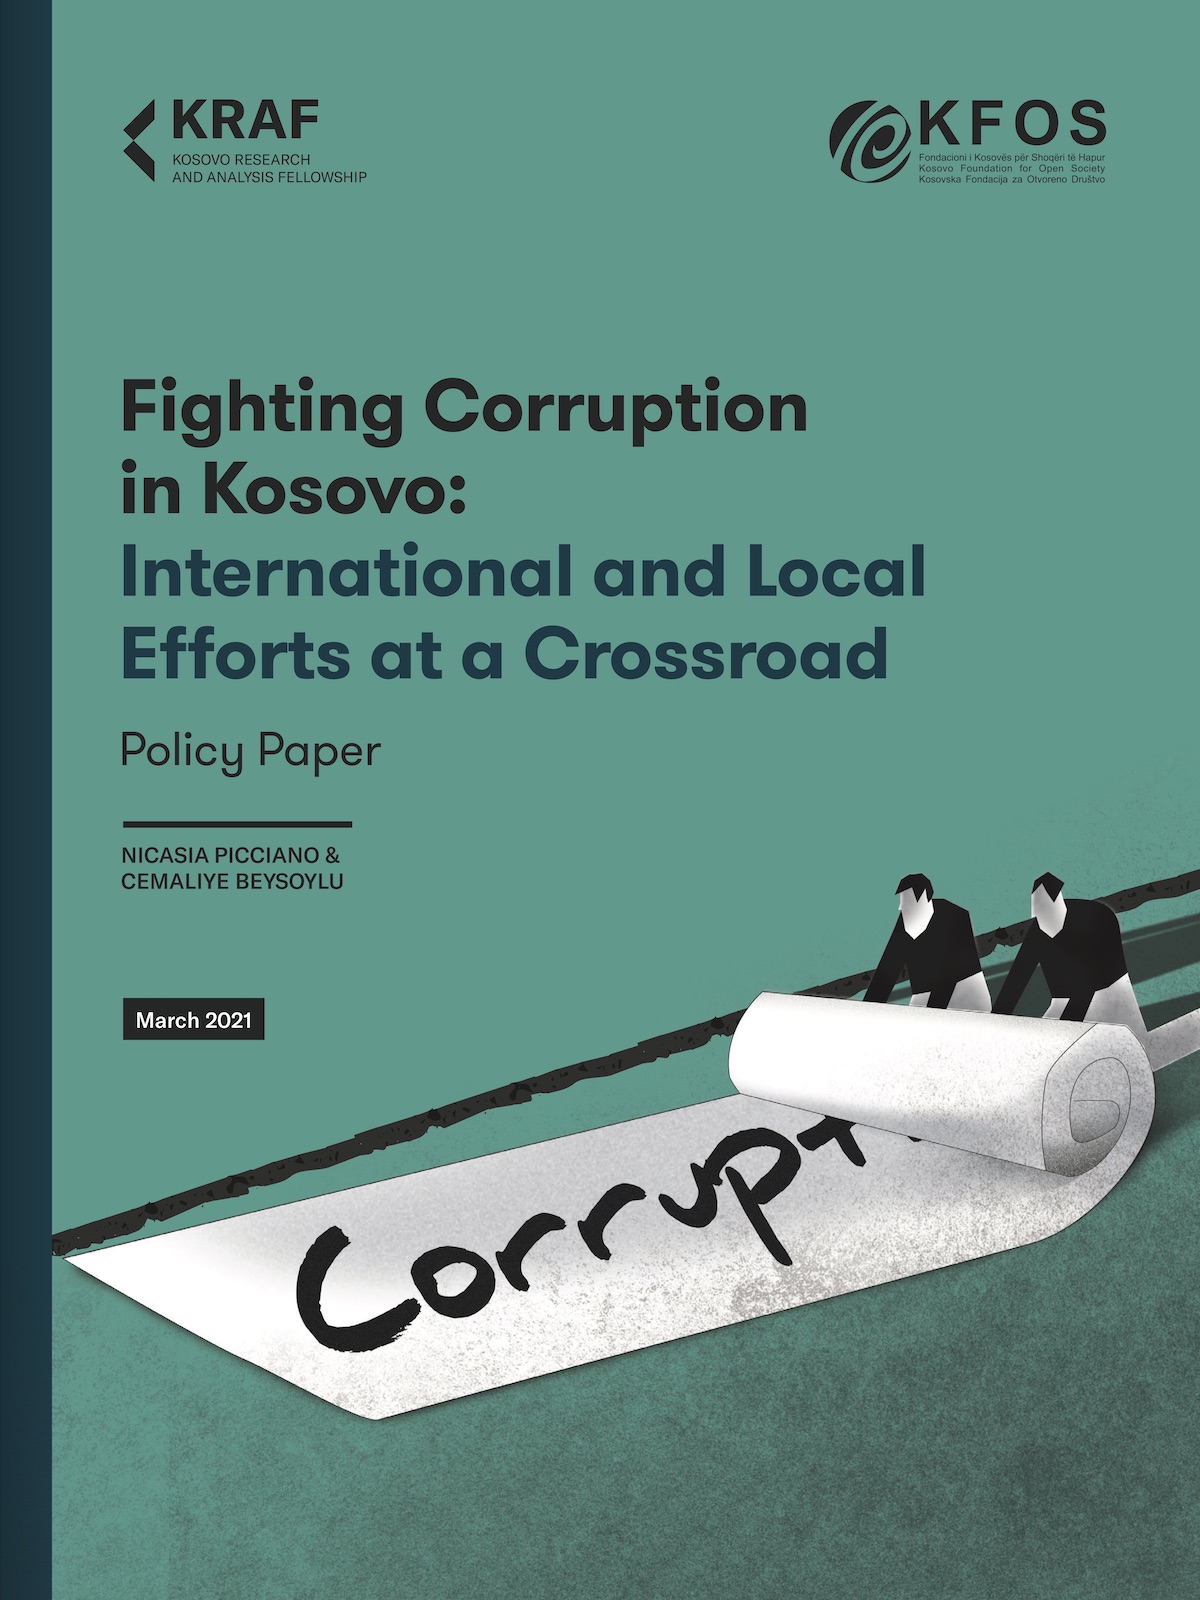 Fighting Corruption in Kosovo: International and Local Efforts at a Crossroad